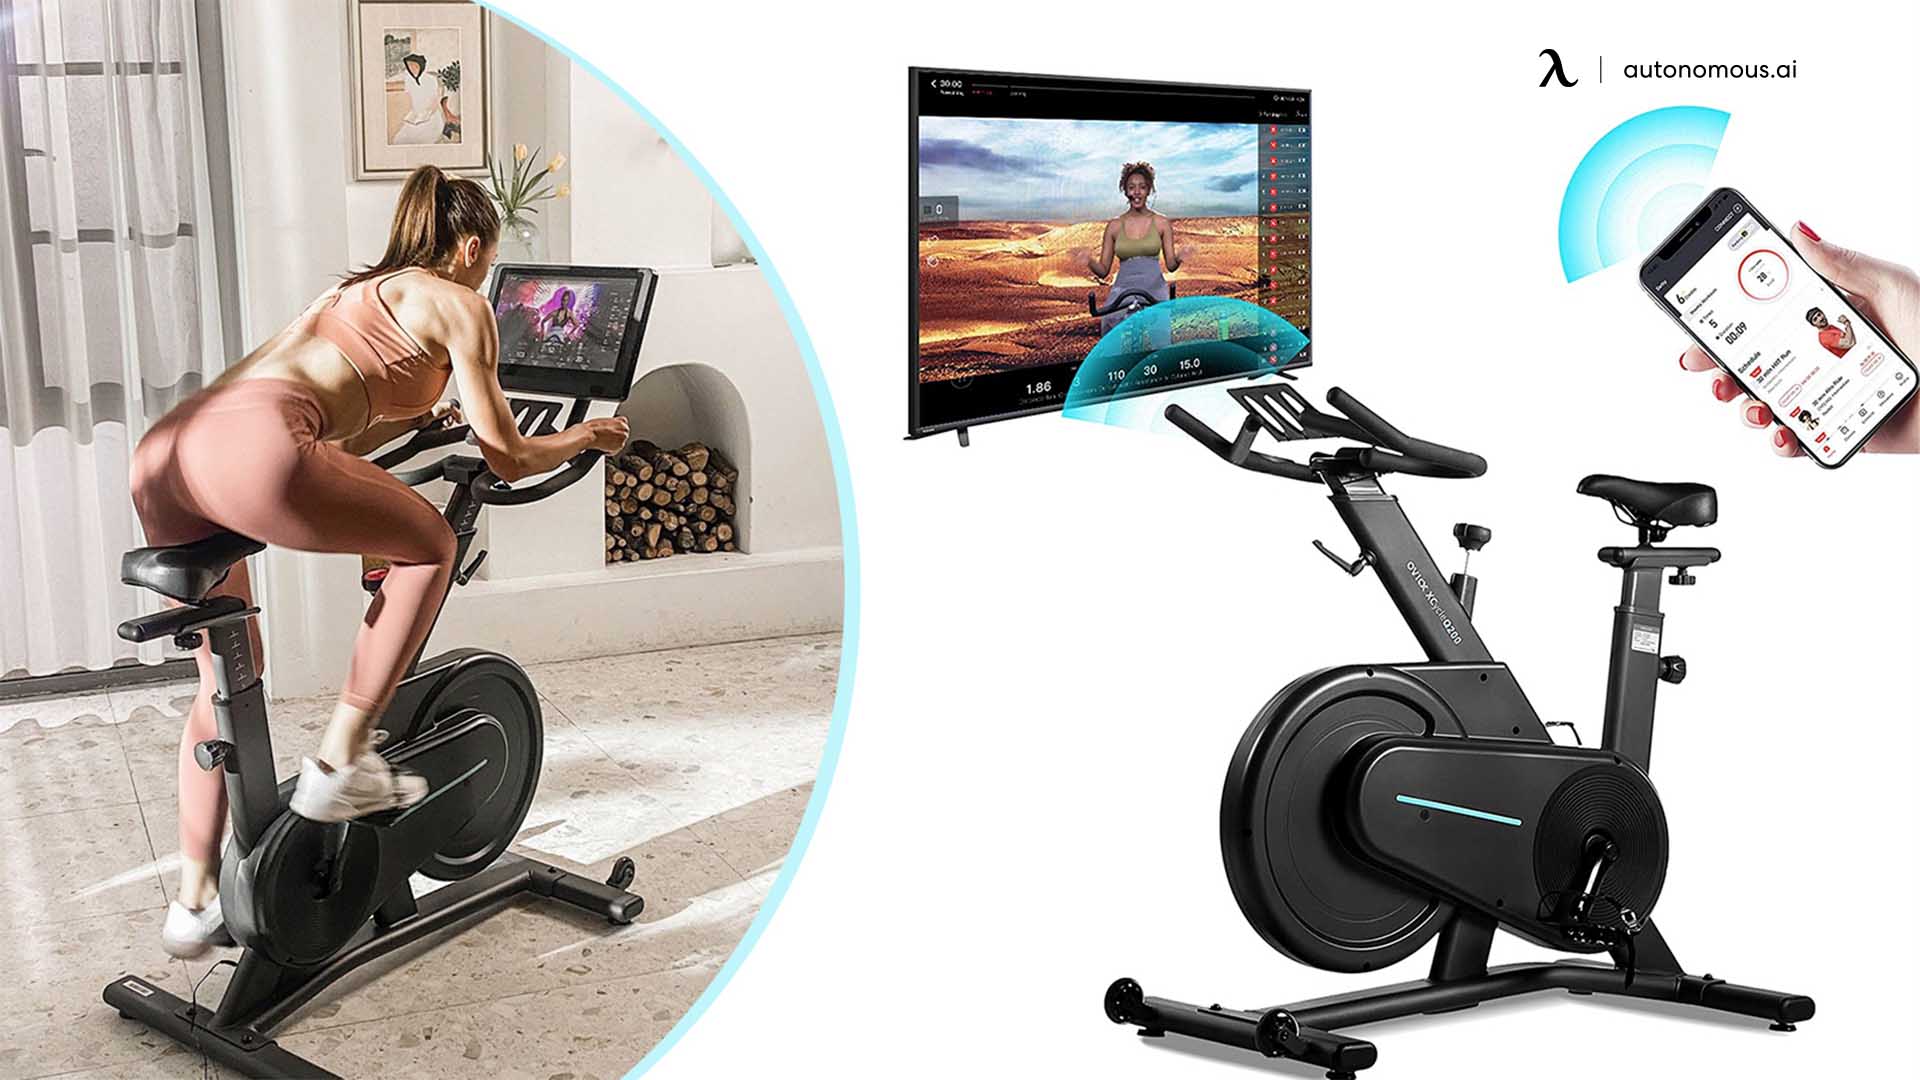 Ovicx Indoor Cycle full-body workout equipment at home